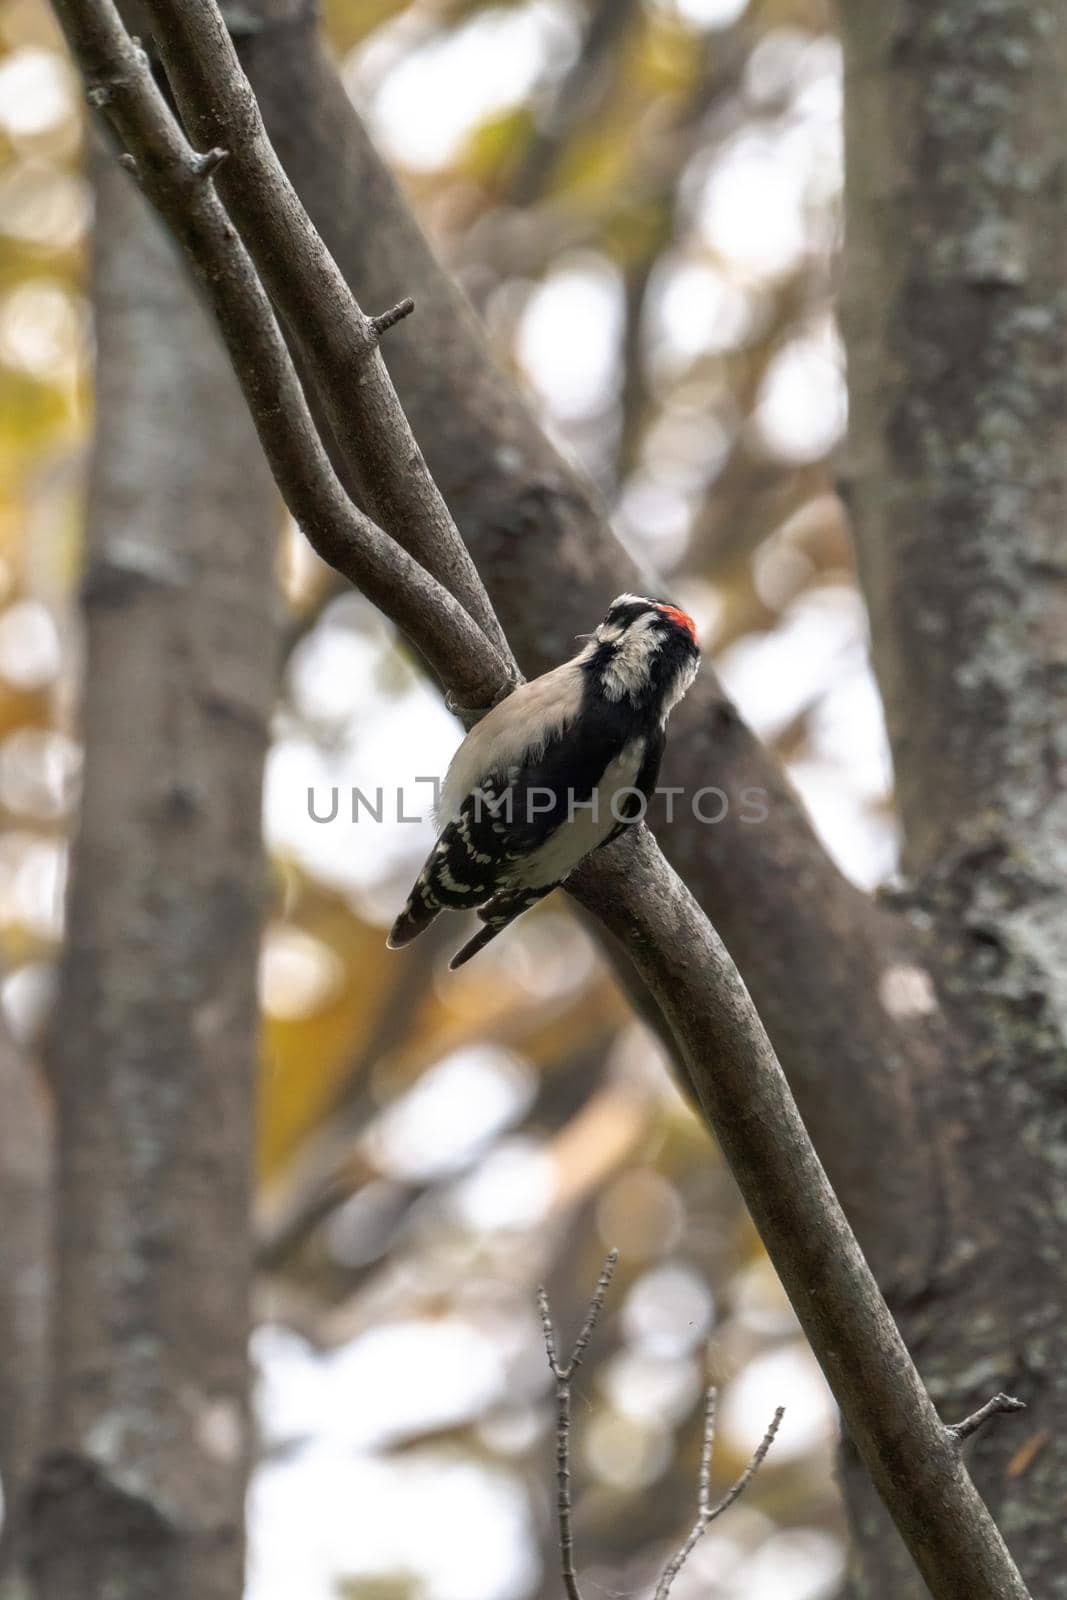 A close-up wildlife bird photograph of a male downy woodpecker clinging to a branch in the woods with other trees blurred in the background in the Midwest.